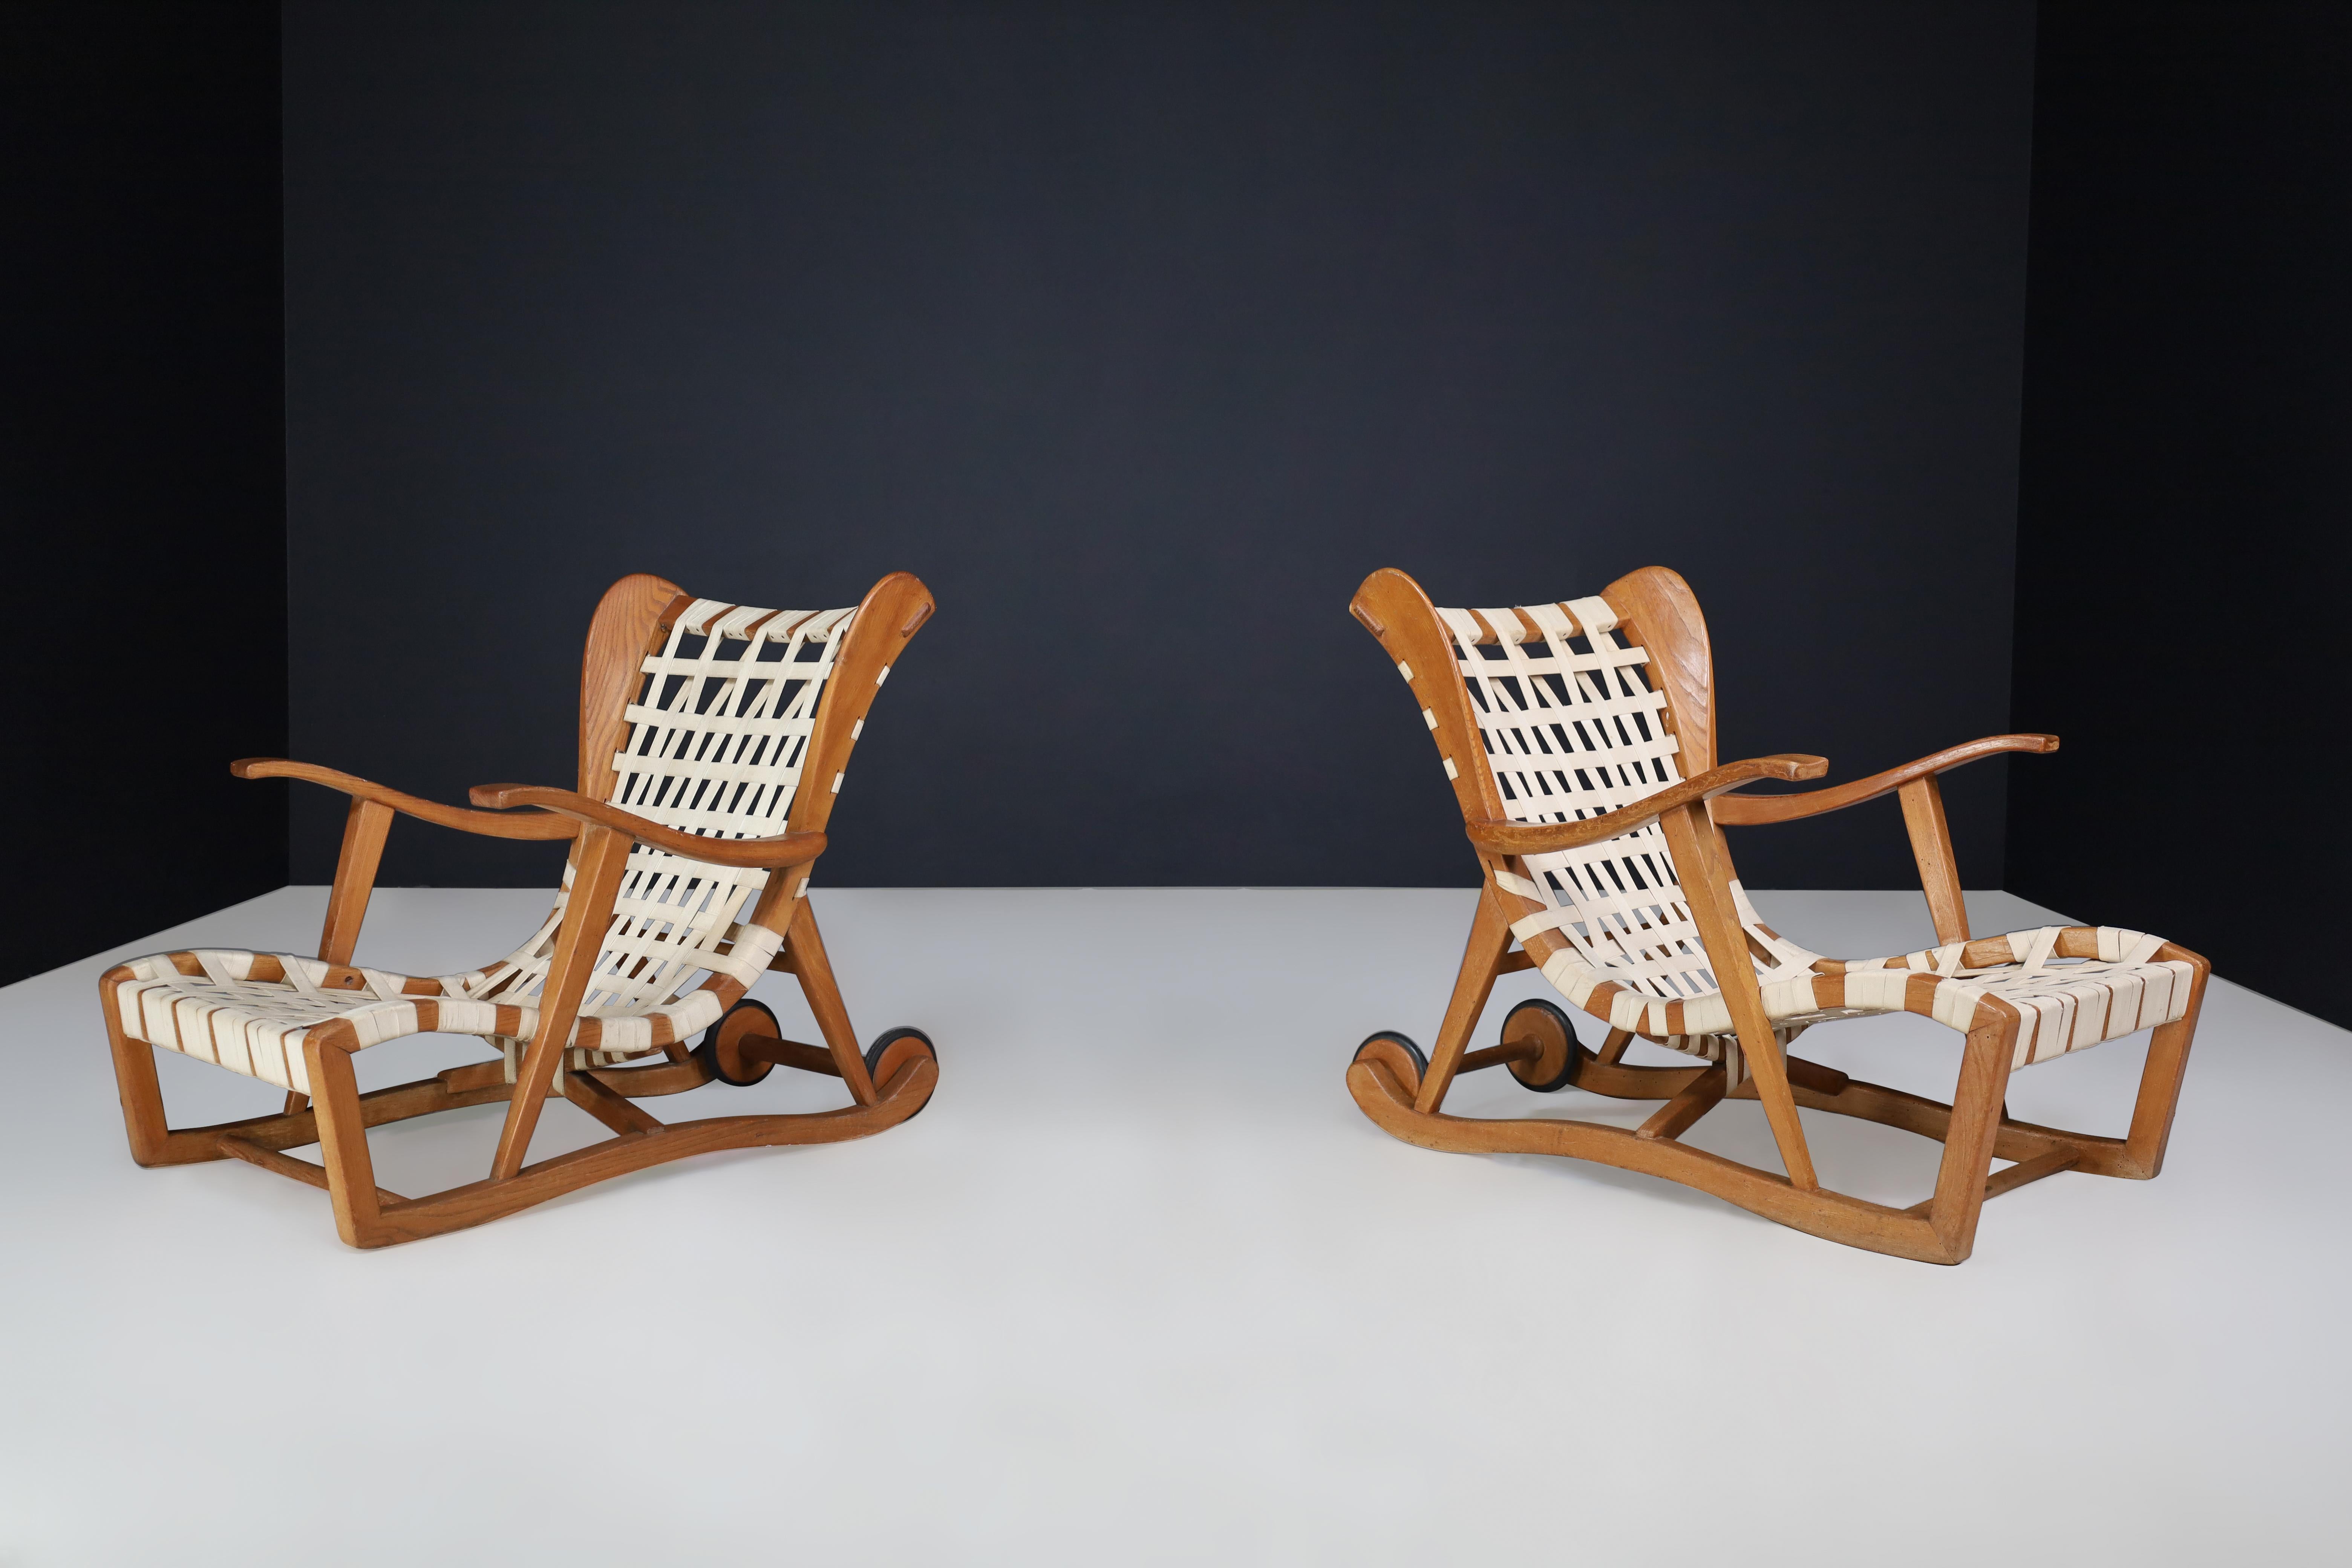 20th Century Sculptural oak Lounge chairs by Guglielmo Pecorini, Italy, the 1950s   For Sale